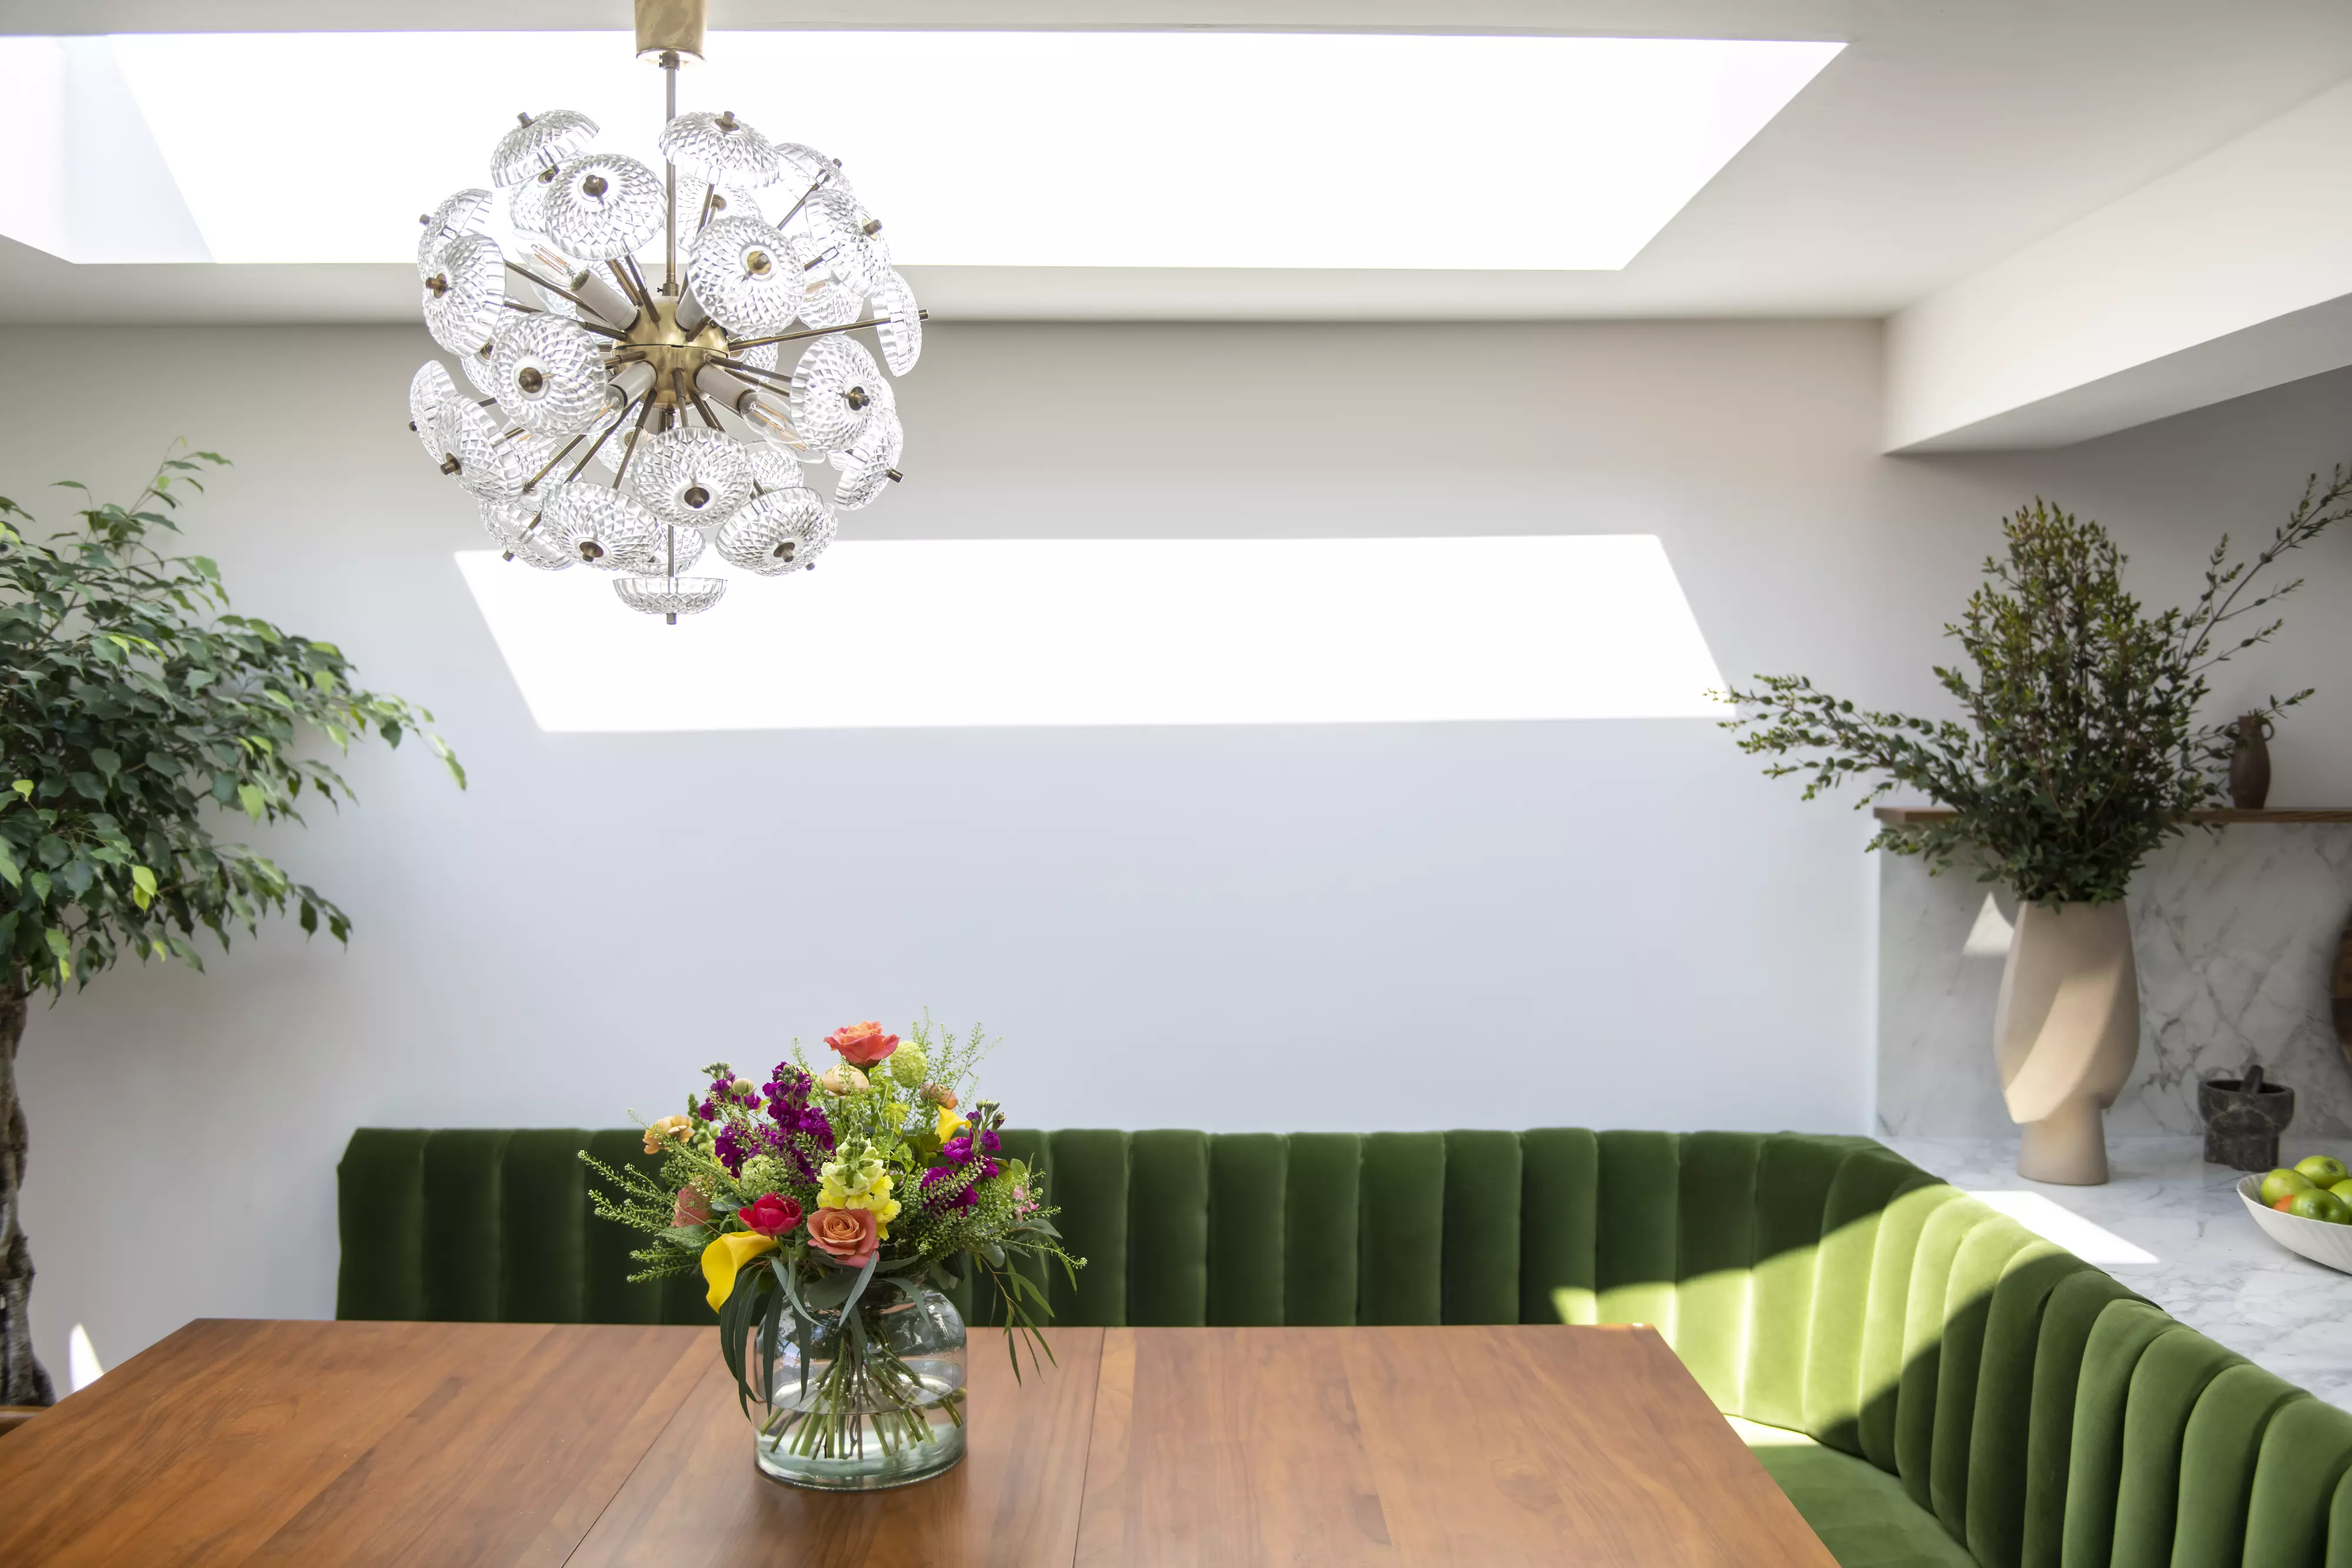 Chic dining room with VELUX windows, green booth, and a floral centerpiece.